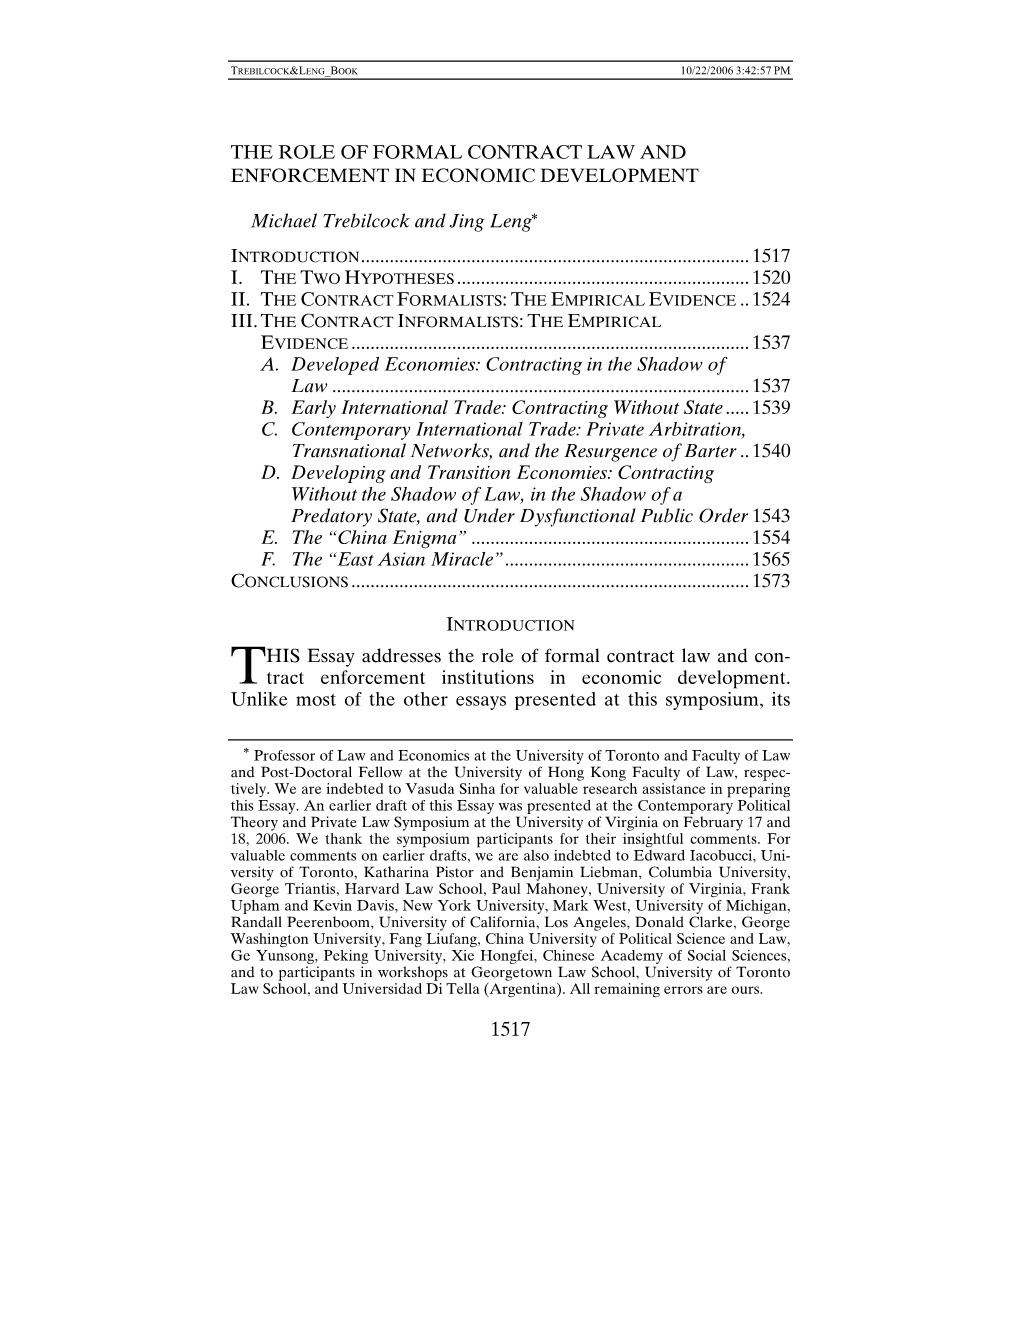 The Role of Formal Contract Law and Enforcement in Economic Development